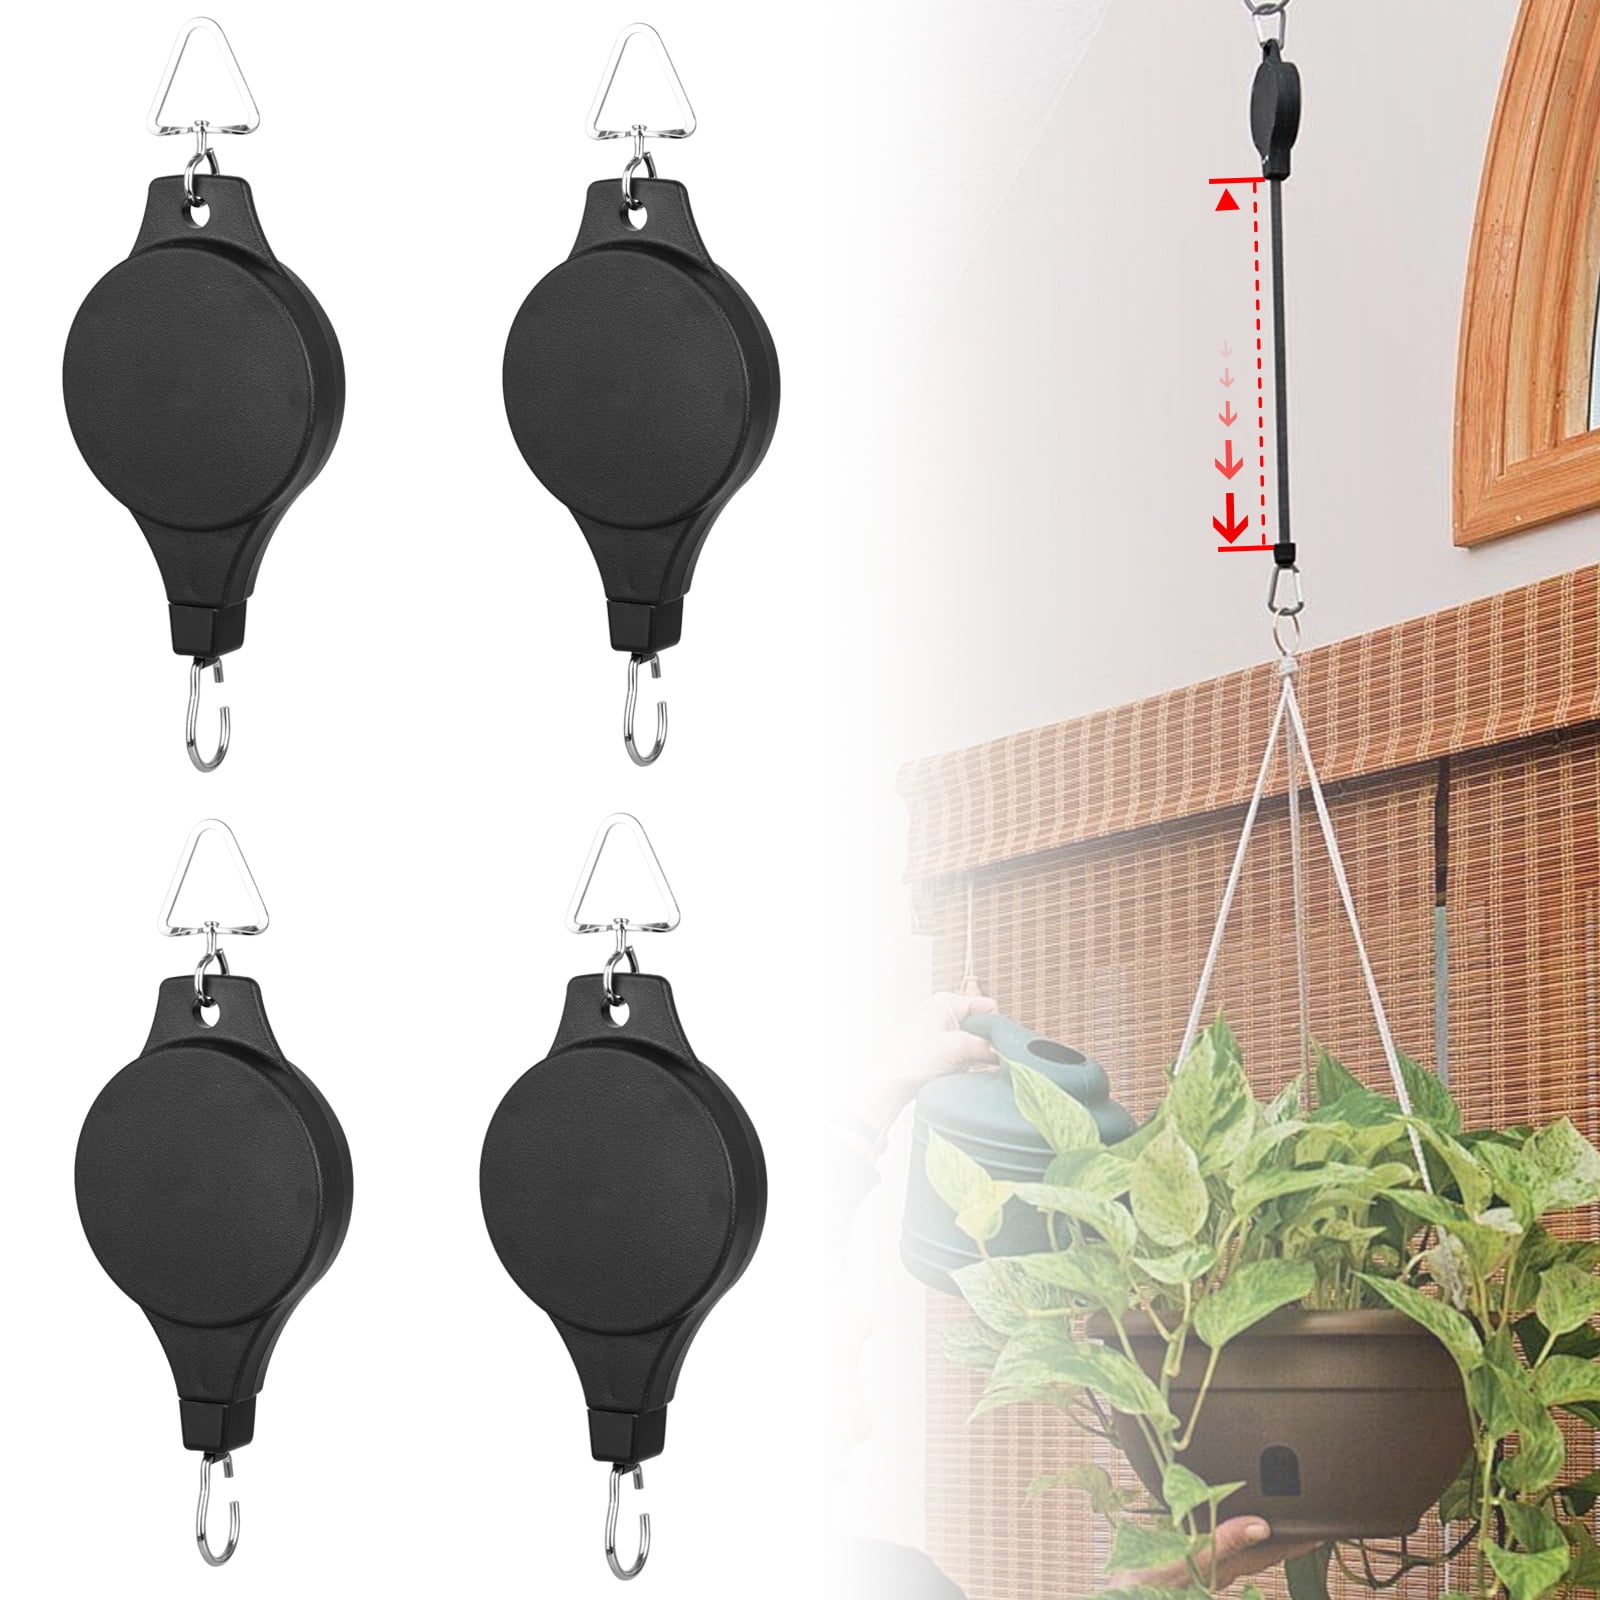 Ogrmar Plant Pulley Retractable Pulley Plant Hanger Hanging Flower Basket Hook Hanger for Garden Baskets Pots and Birds Feeder in Different Height Lower and Raise Pack of 4 Black x4 